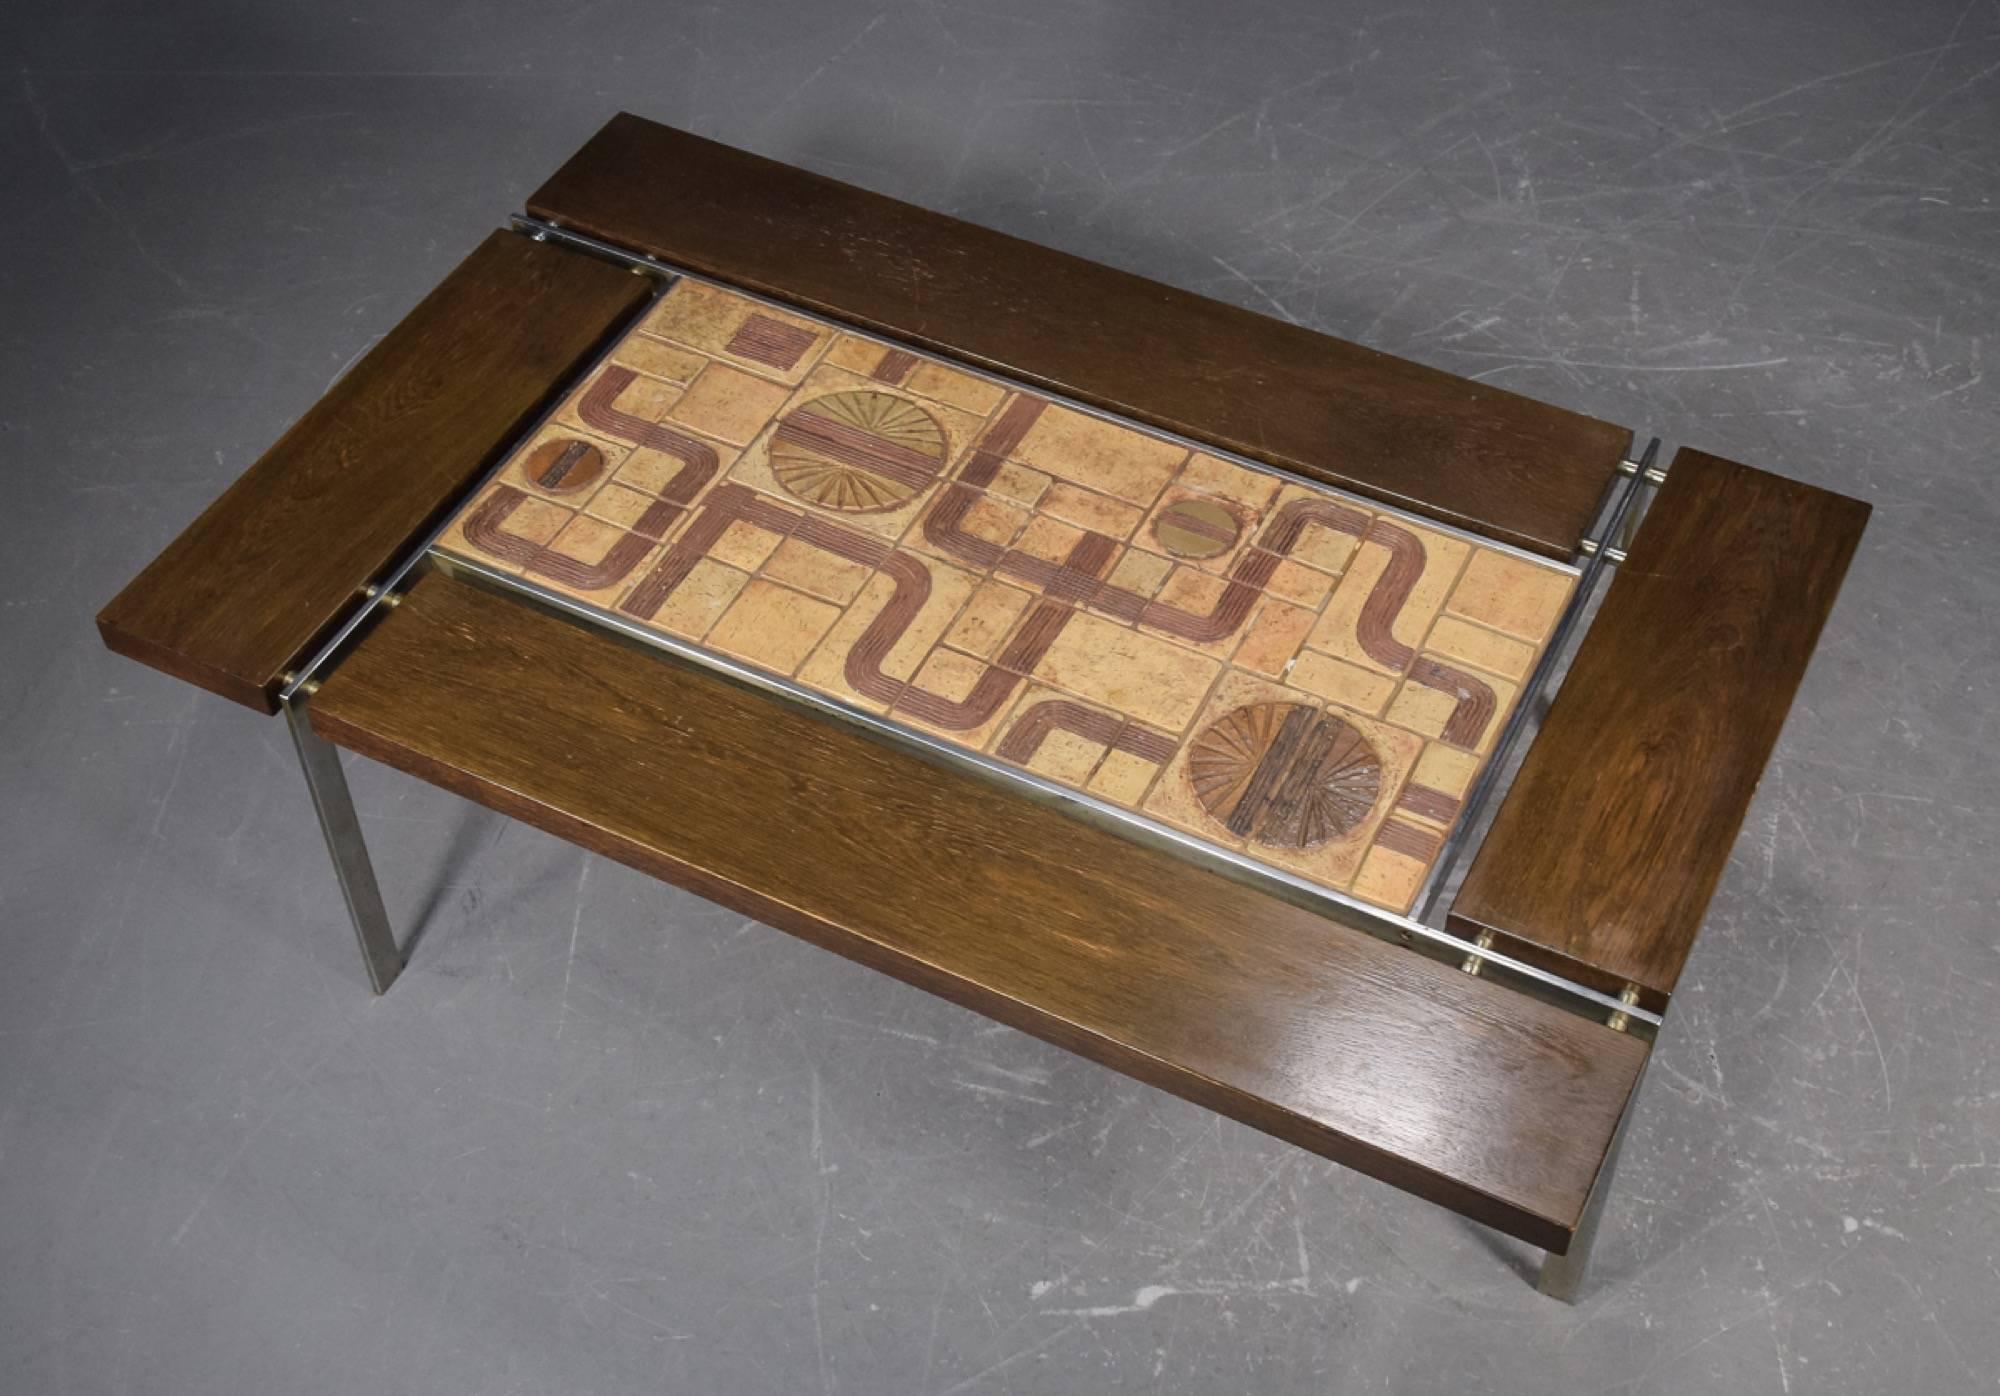 Midcentury tile, wood and stainless steel coffee table by Svend Aage Jessen & Sejer Pottery for Ryesberg Møbler. Tiles signed by Sejer Keramik.